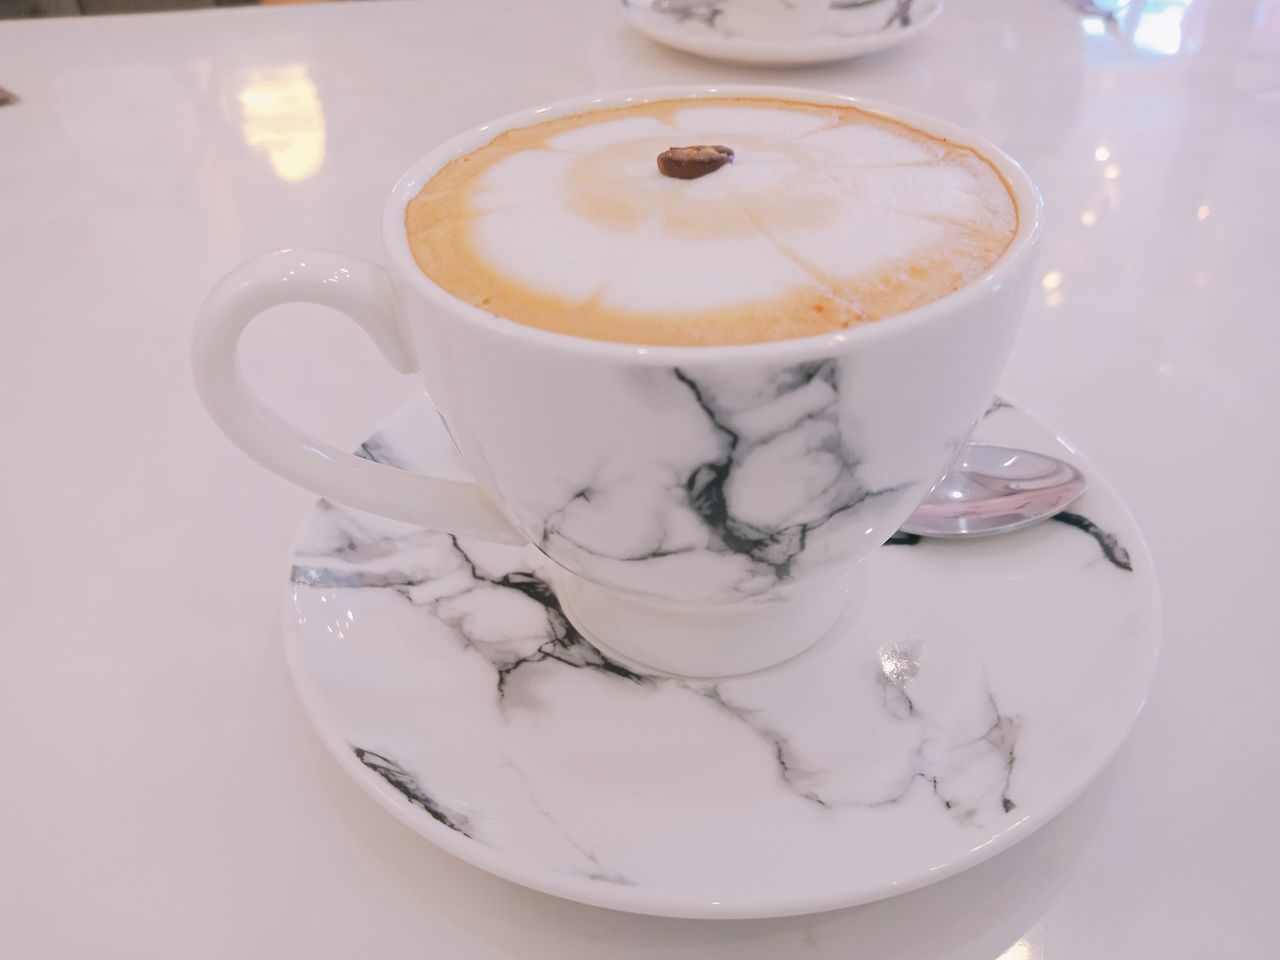 CLOSE-UP OF COFFEE CUP WITH CAPPUCCINO